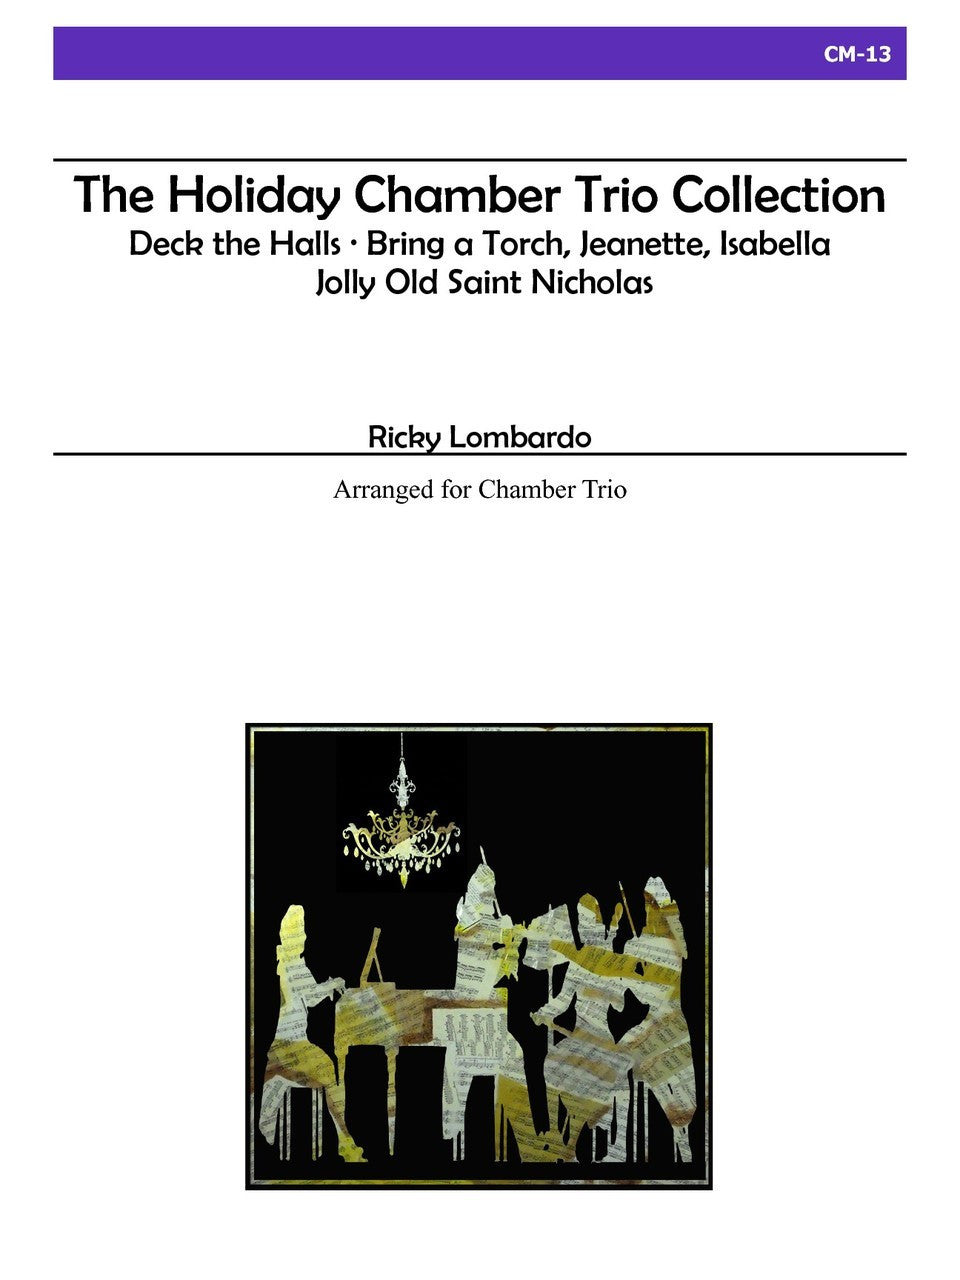 Lombardo - The Holiday Chamber Trio Collection